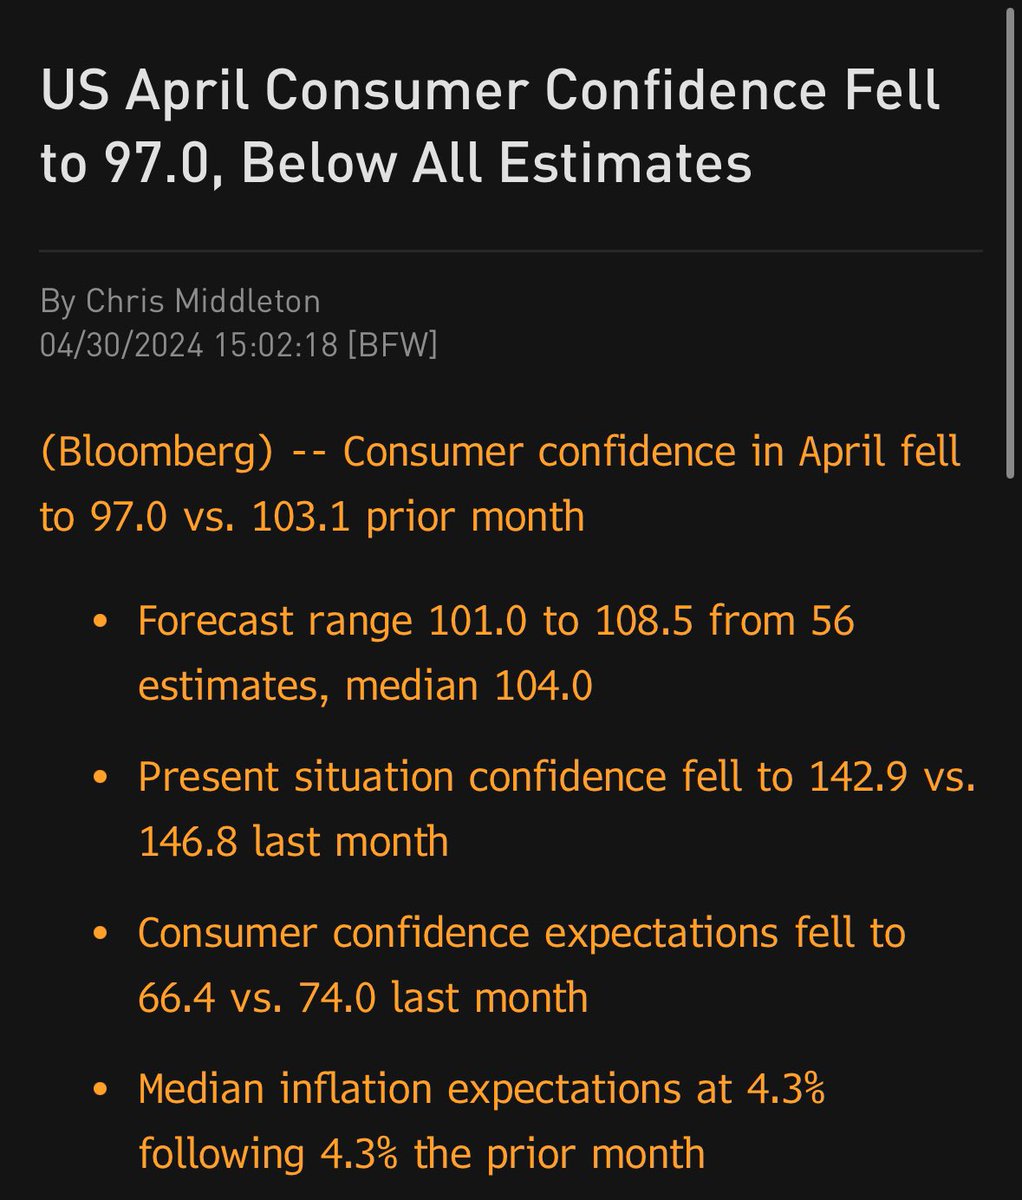 Further to my prior post, and per the Bloomberg summary below, US consumer confidence for April fell to a level that is well below the consensus forecast.

#economy #markets #EconTwitter @economics @markets